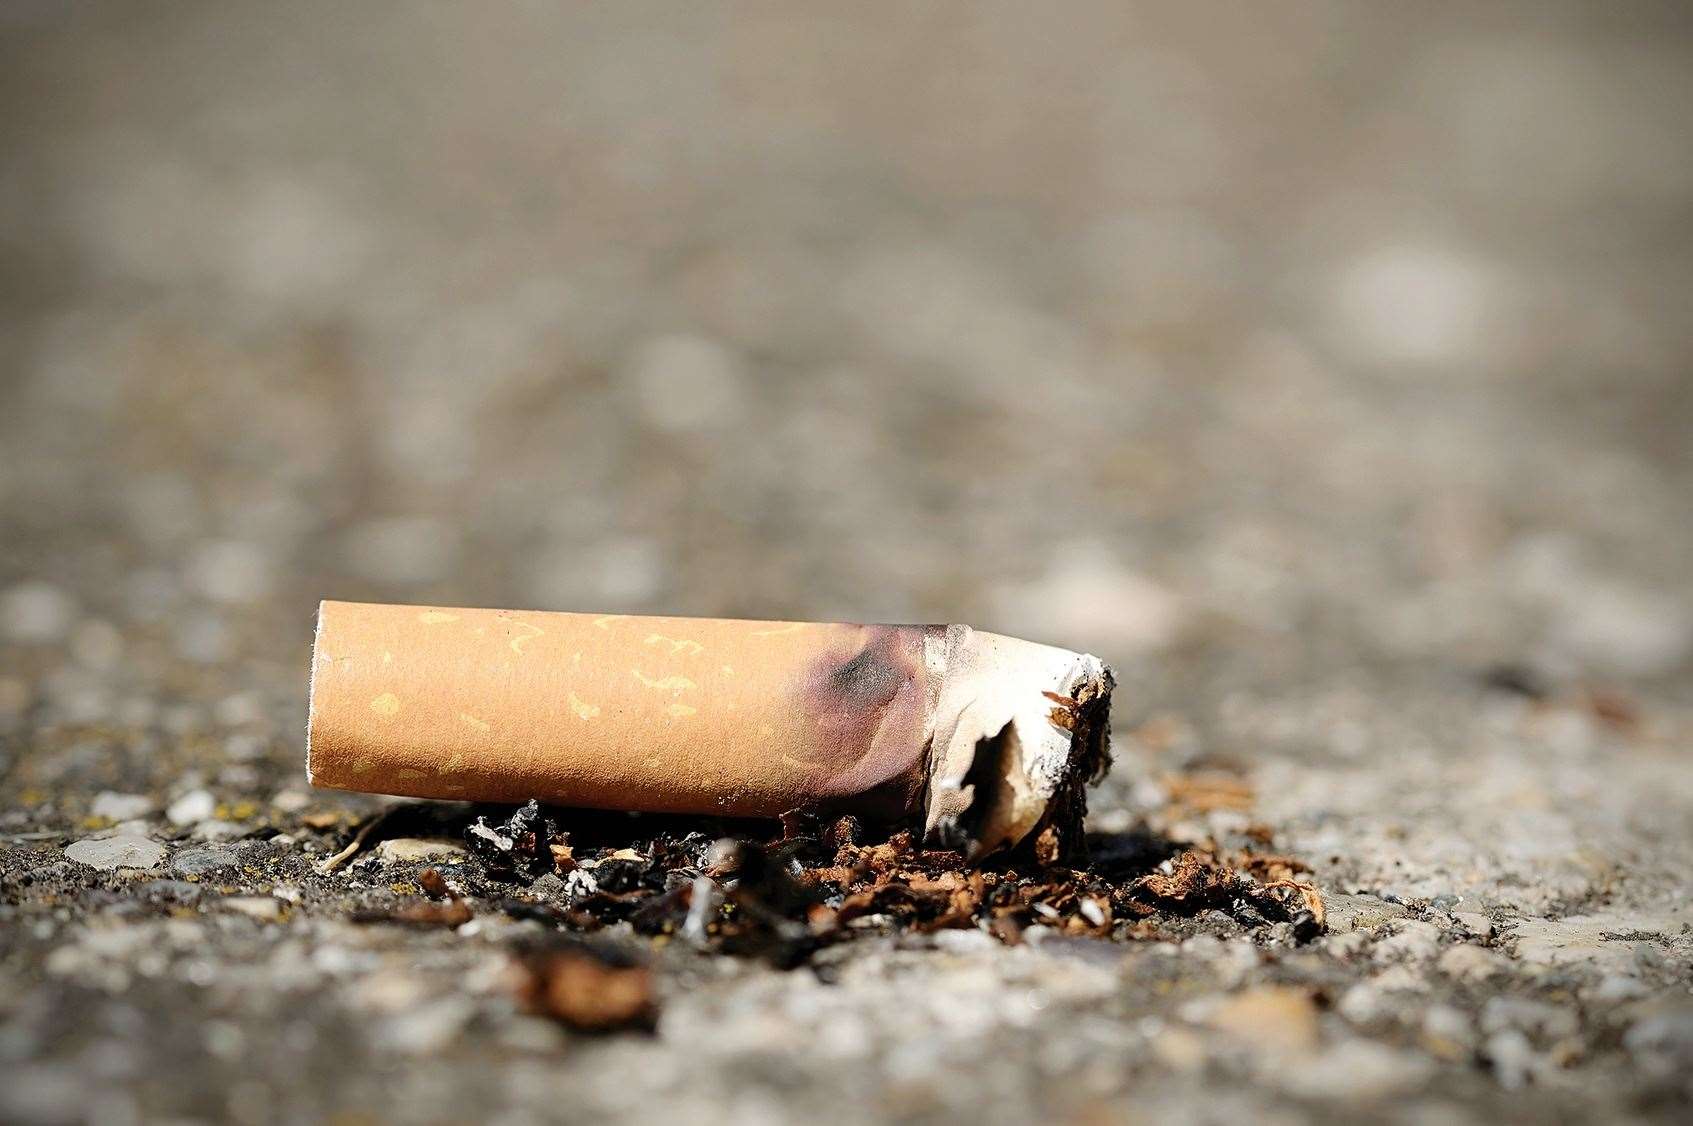 17 people have been fined £254 for dropping a cigarette butt. Picture: istock